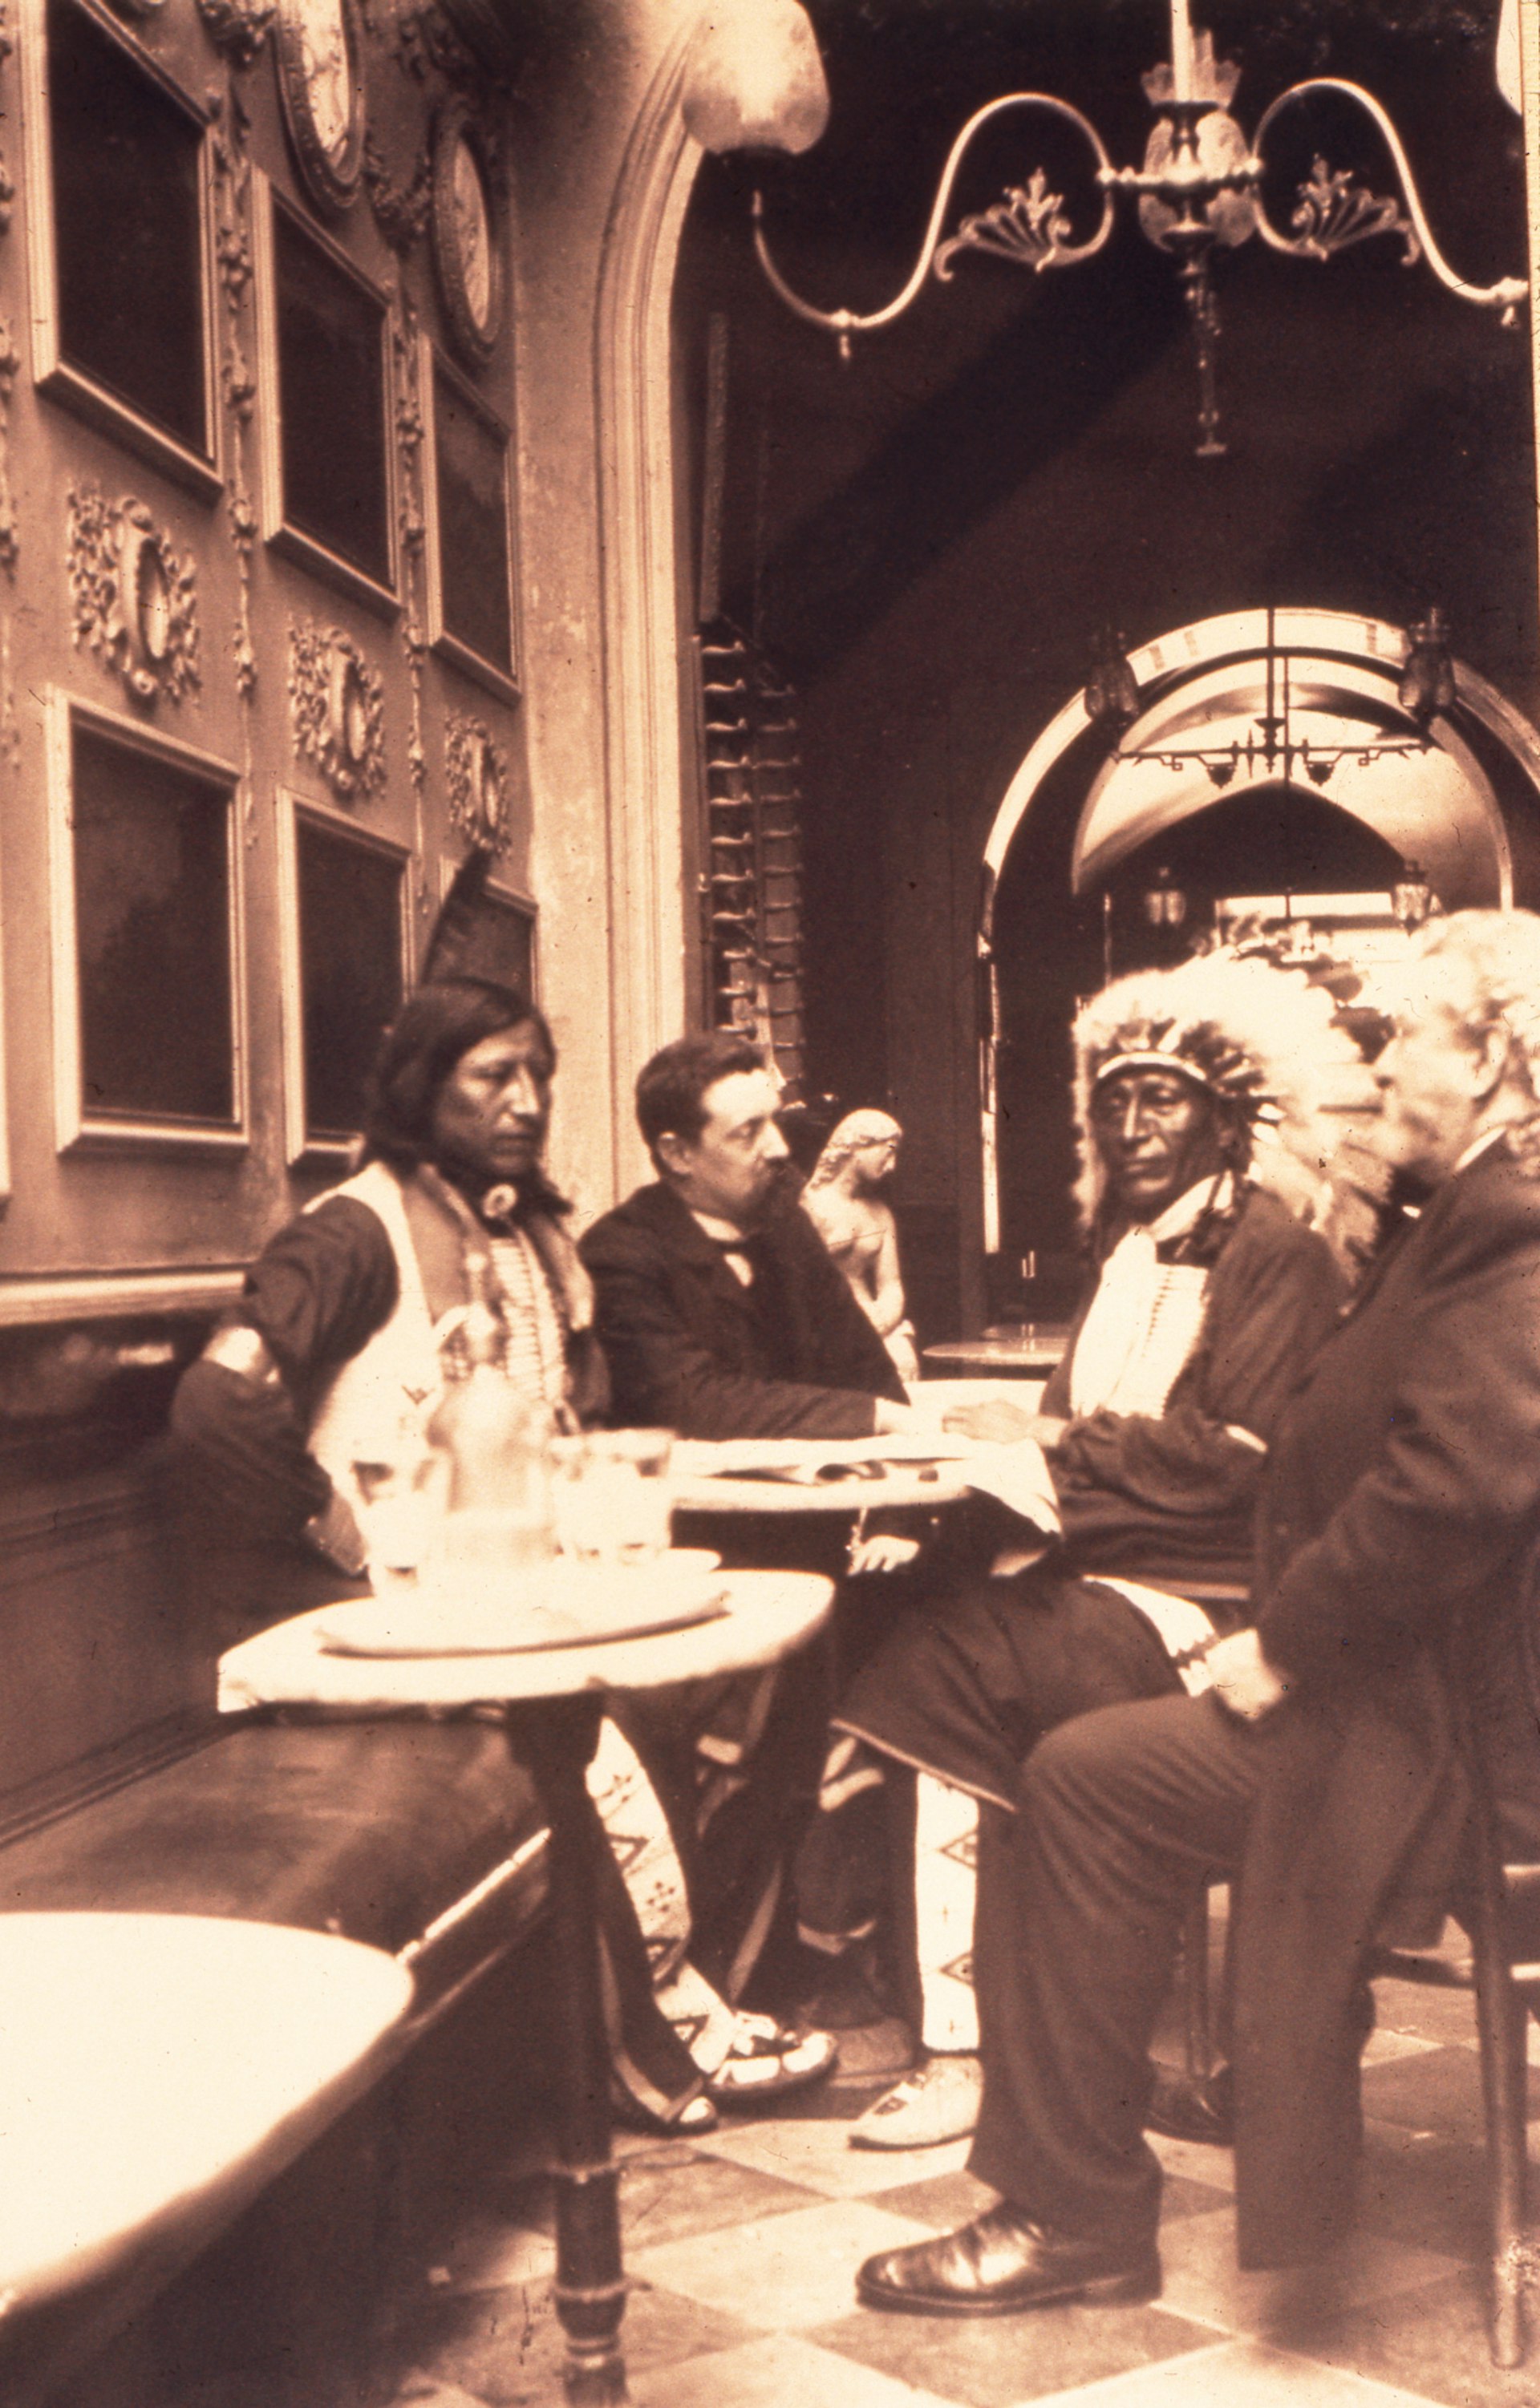 An archive picture of Buffalo Bill sitting at one of Caffé Greco's tables